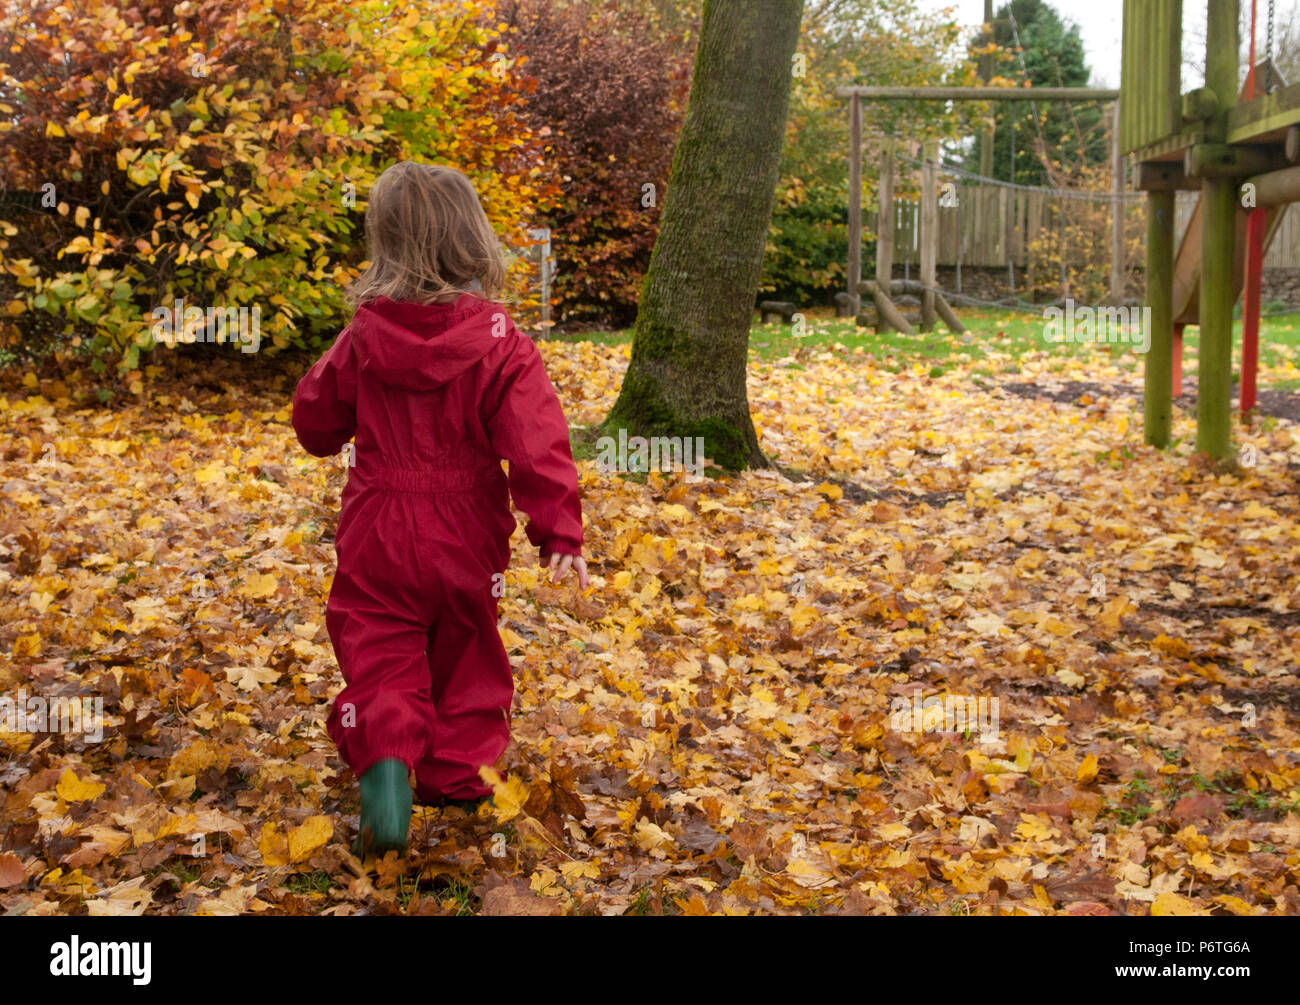 Rear view of toddler walking through autumn leaves wearing a red puddle suit and green wellies Stock Photo